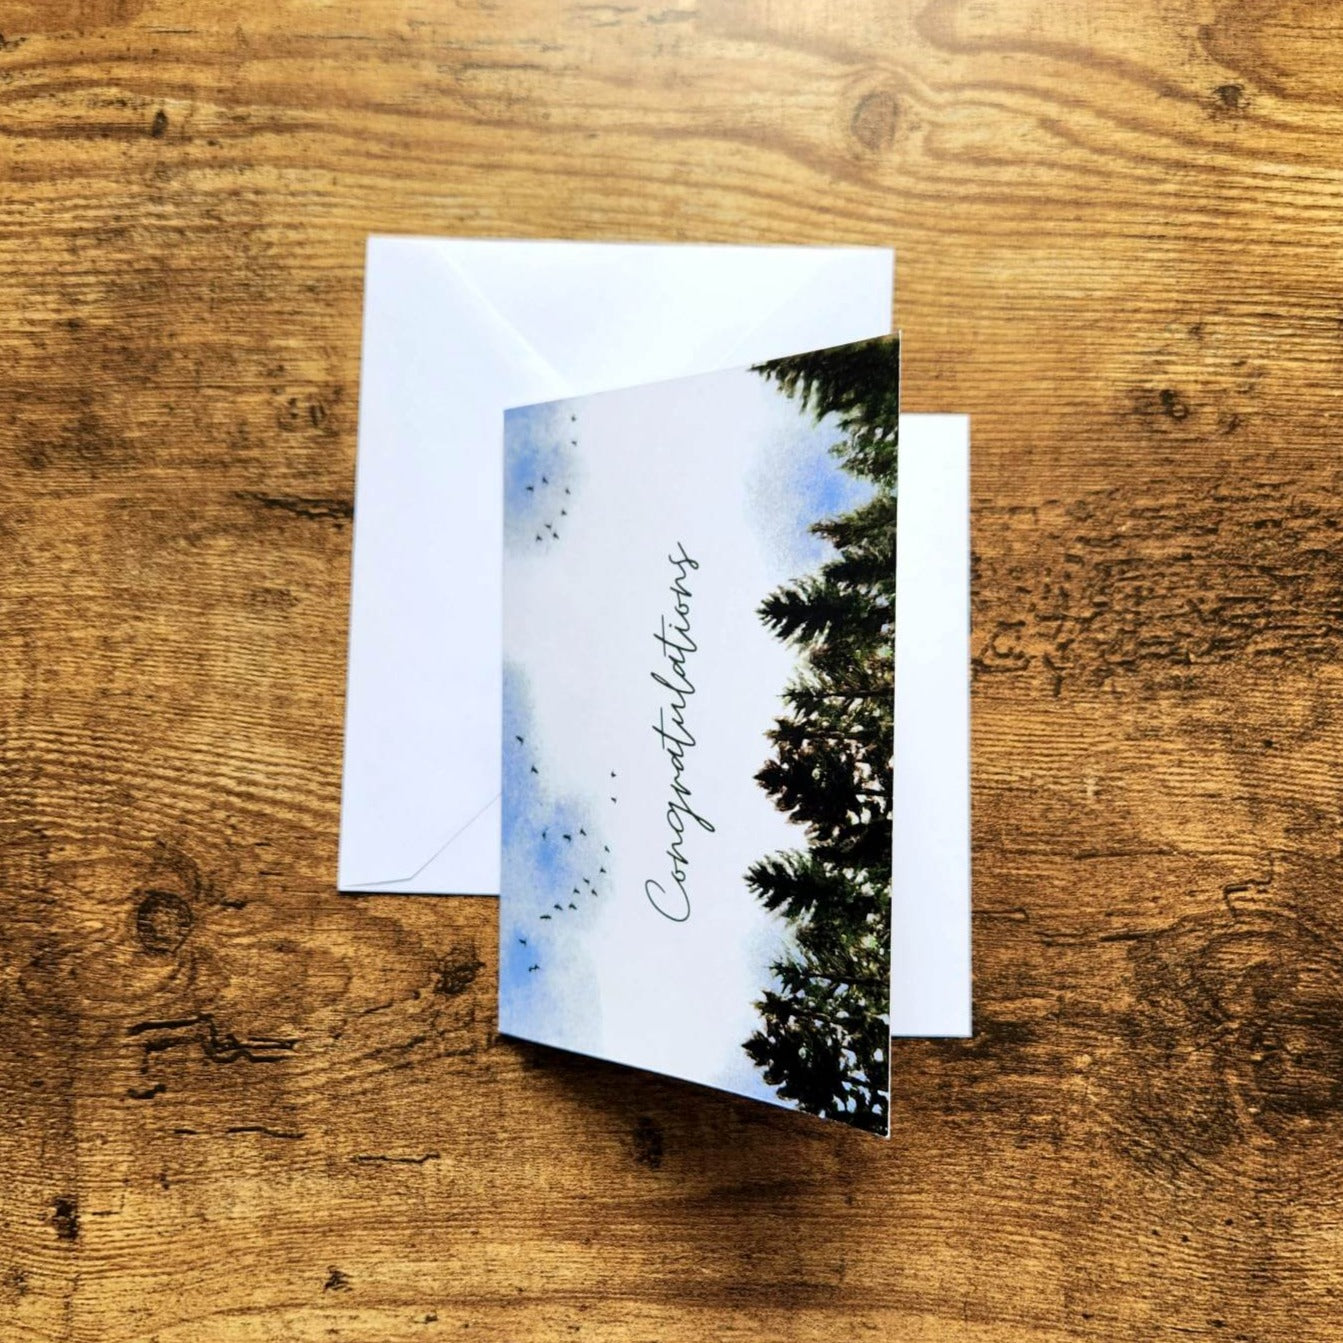 Congratulations card, Outdoorsy congrats card, Simple congratulations card, Graduation card, New Job, New home, Wedding and engagement card